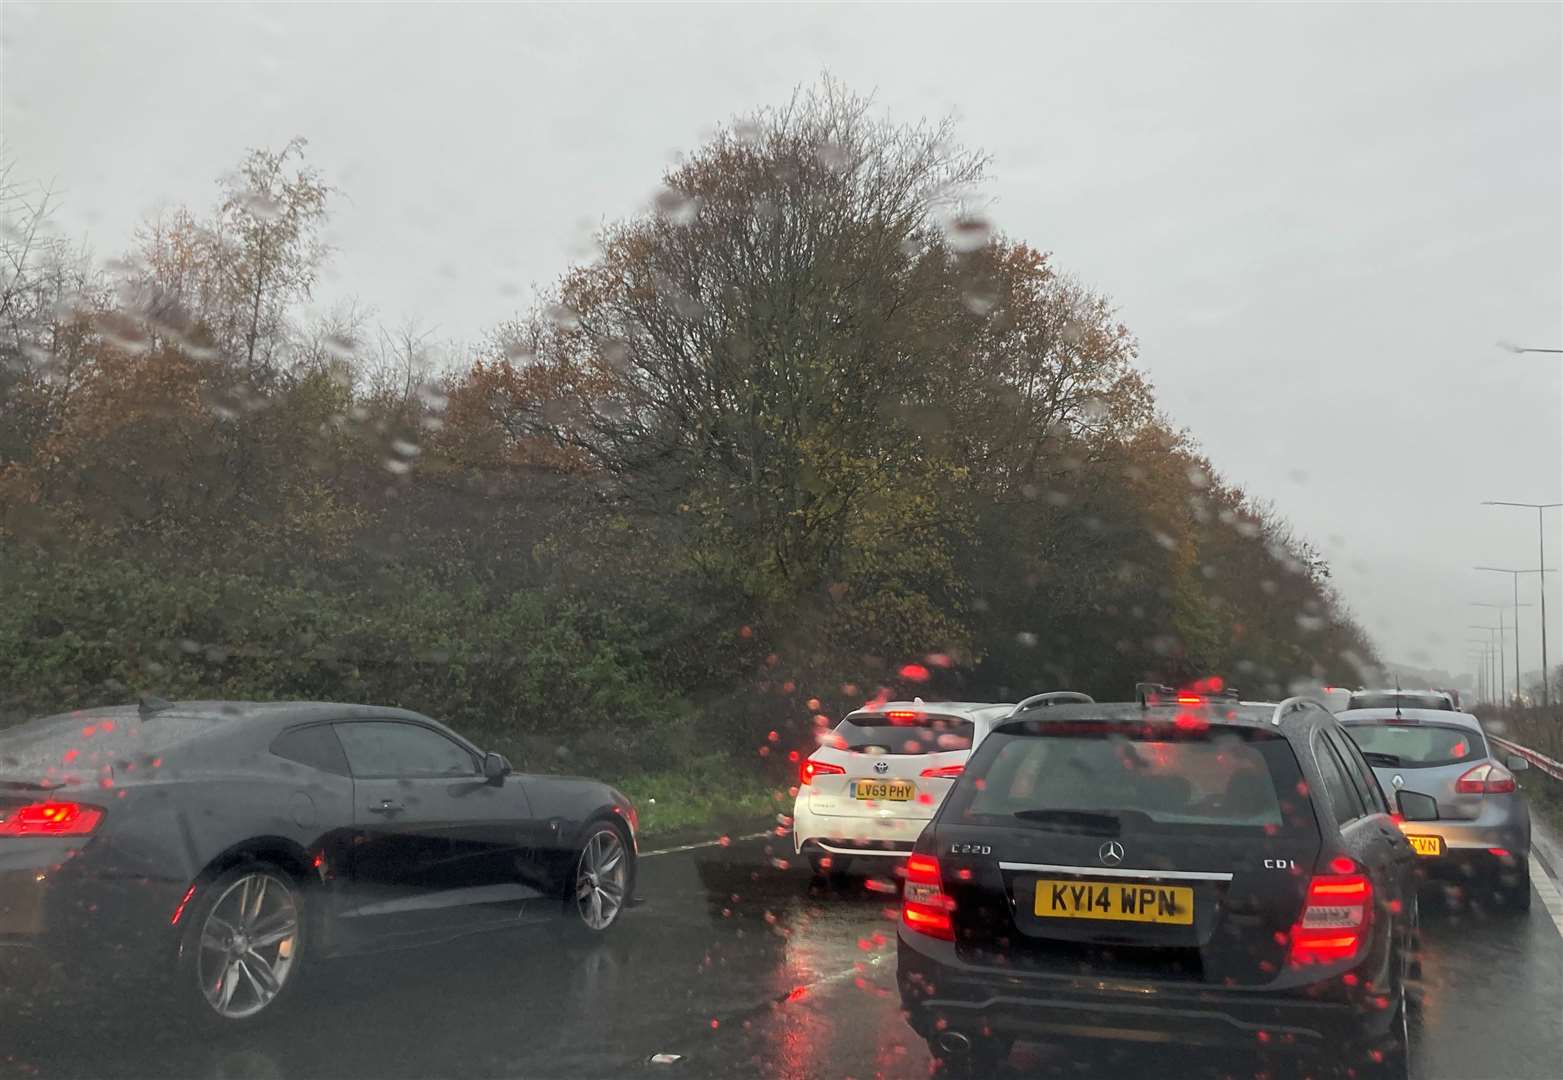 Traffic on the A2 has ground to a halt this afternoon